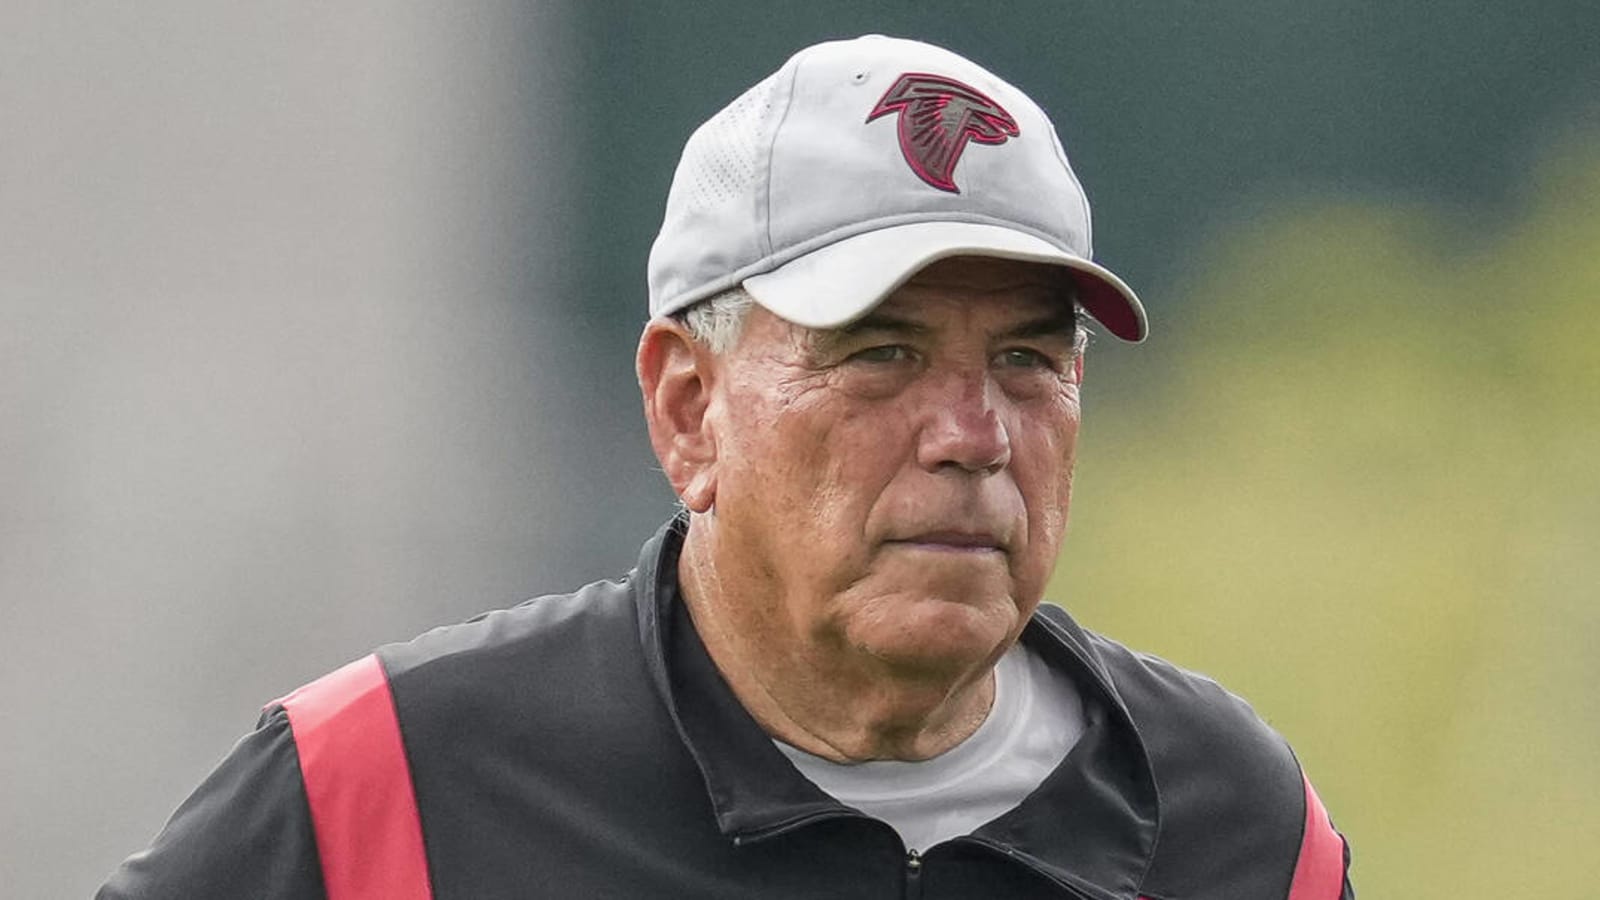 Falcons DC refuses to comment on roughing the passer call upon wife's request